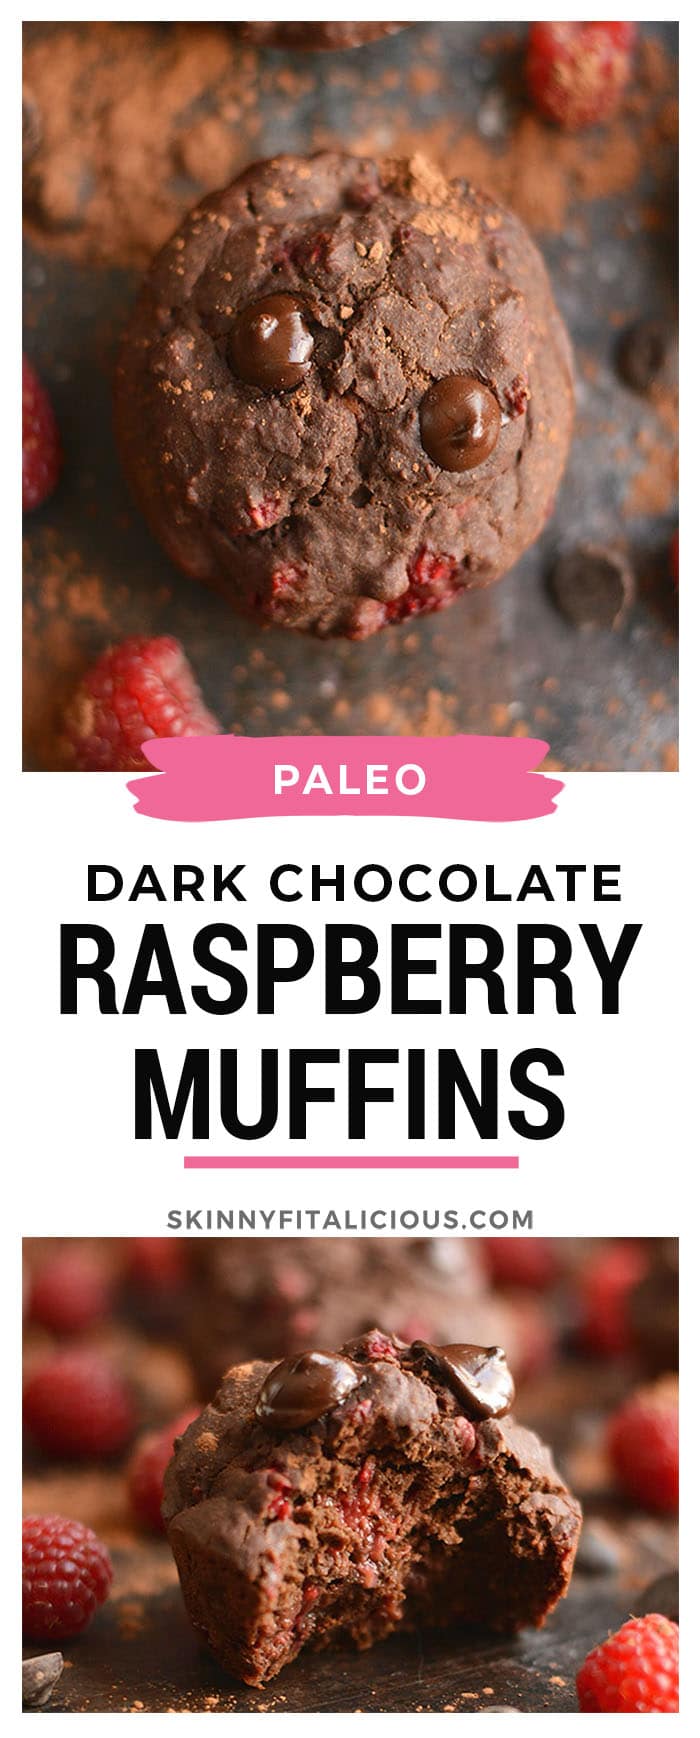 Dark Chocolate Raspberry Muffins bursting with a creamy berry center surrounded by irresistible dark chocolate! A healthier cupcake-like treat that's weight loss friendly. Gluten Free + Low Calorie + Paleo